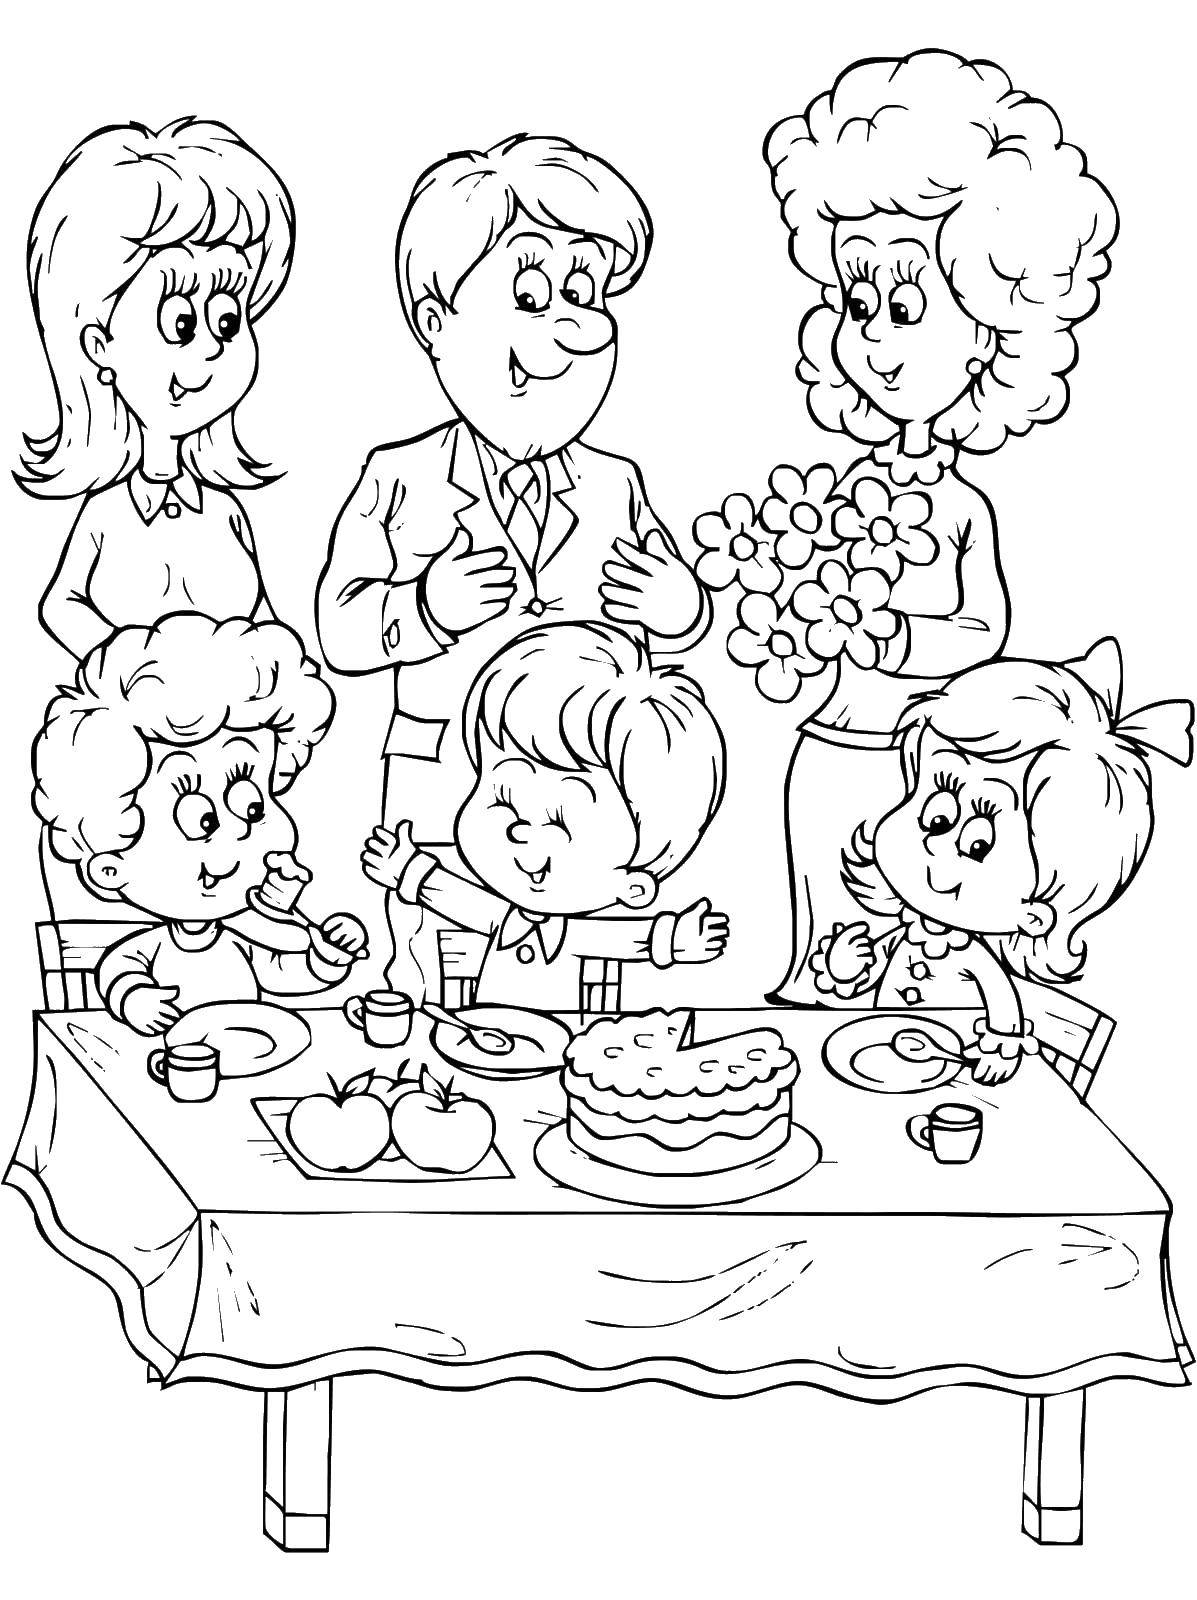 Coloring Children and adults. Category children. Tags:  children, adults, table.